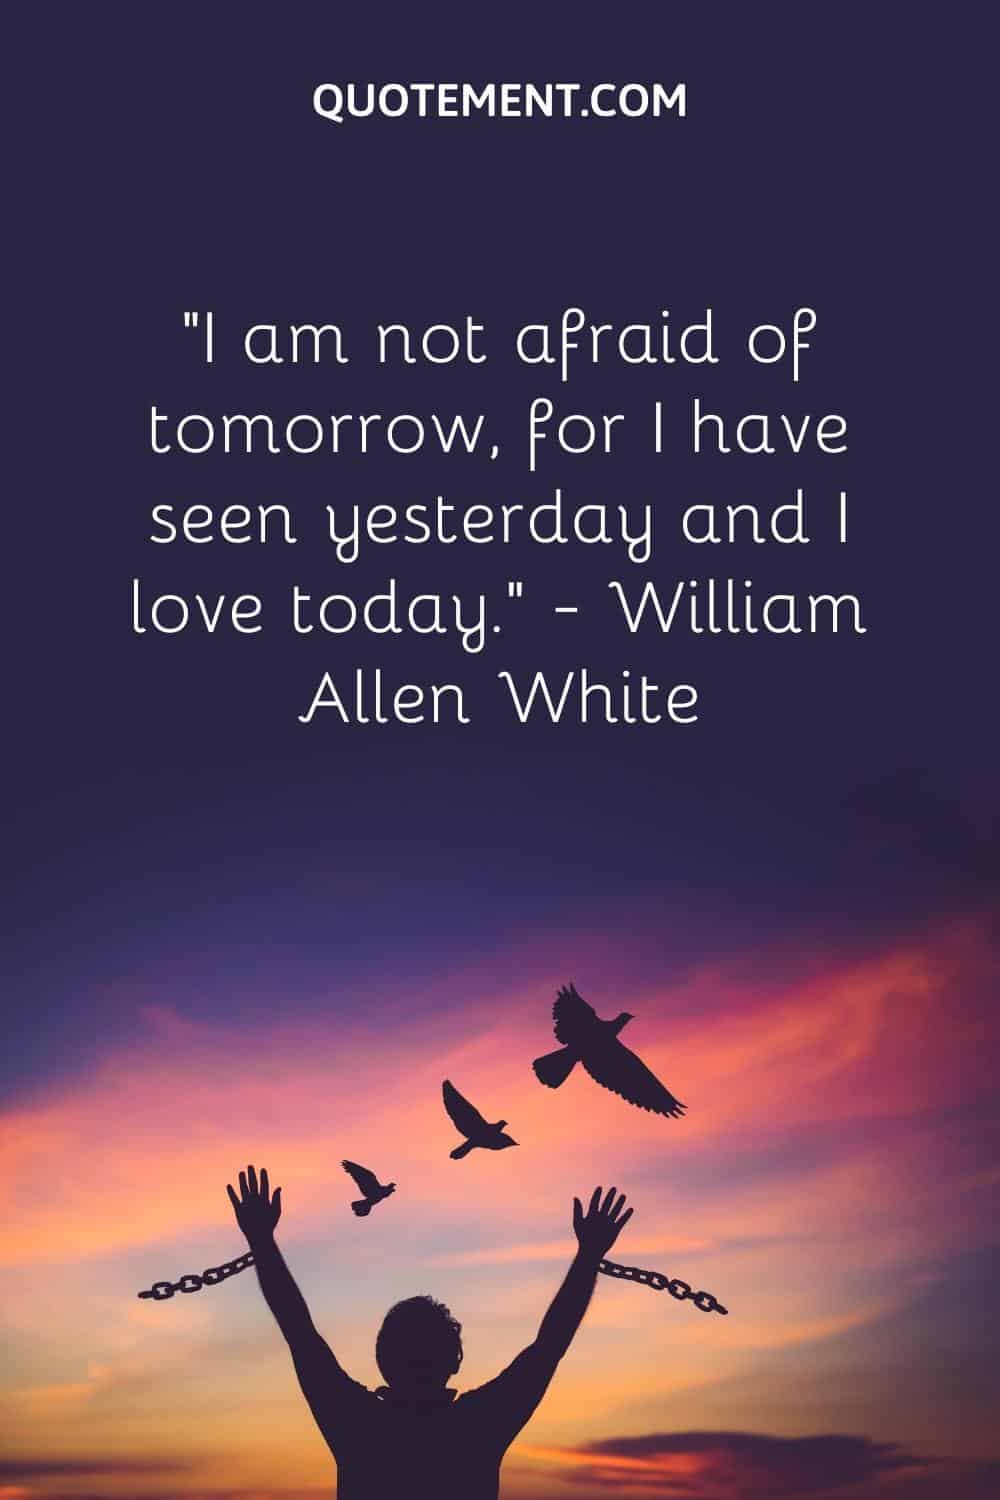 “I am not afraid of tomorrow, for I have seen yesterday and I love today.” — William Allen White